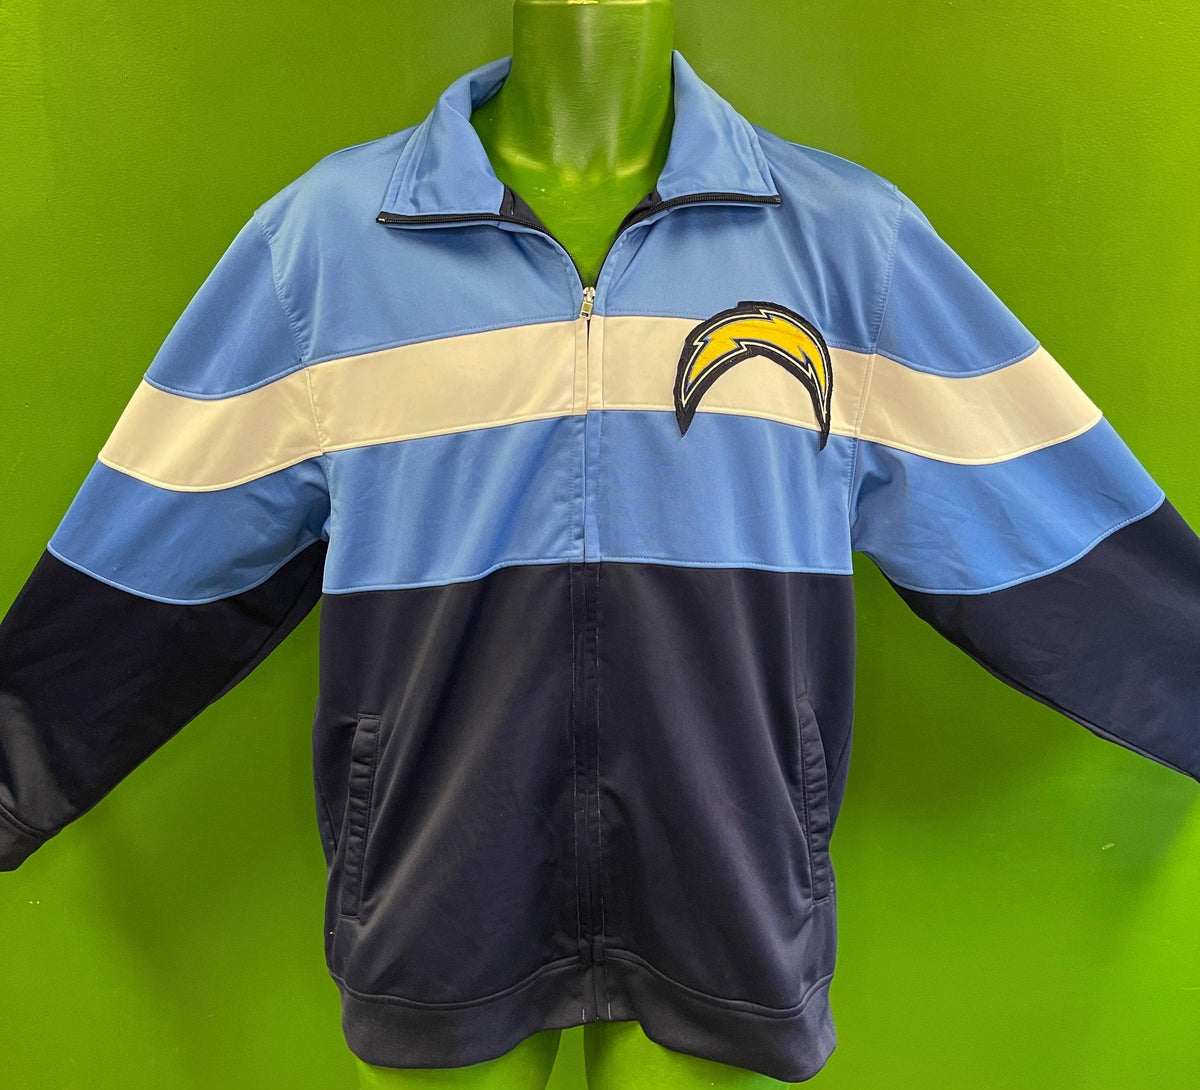 NFL Los Angeles Chargers Reebok Retro Track Jacket Youth X-Large 18-20